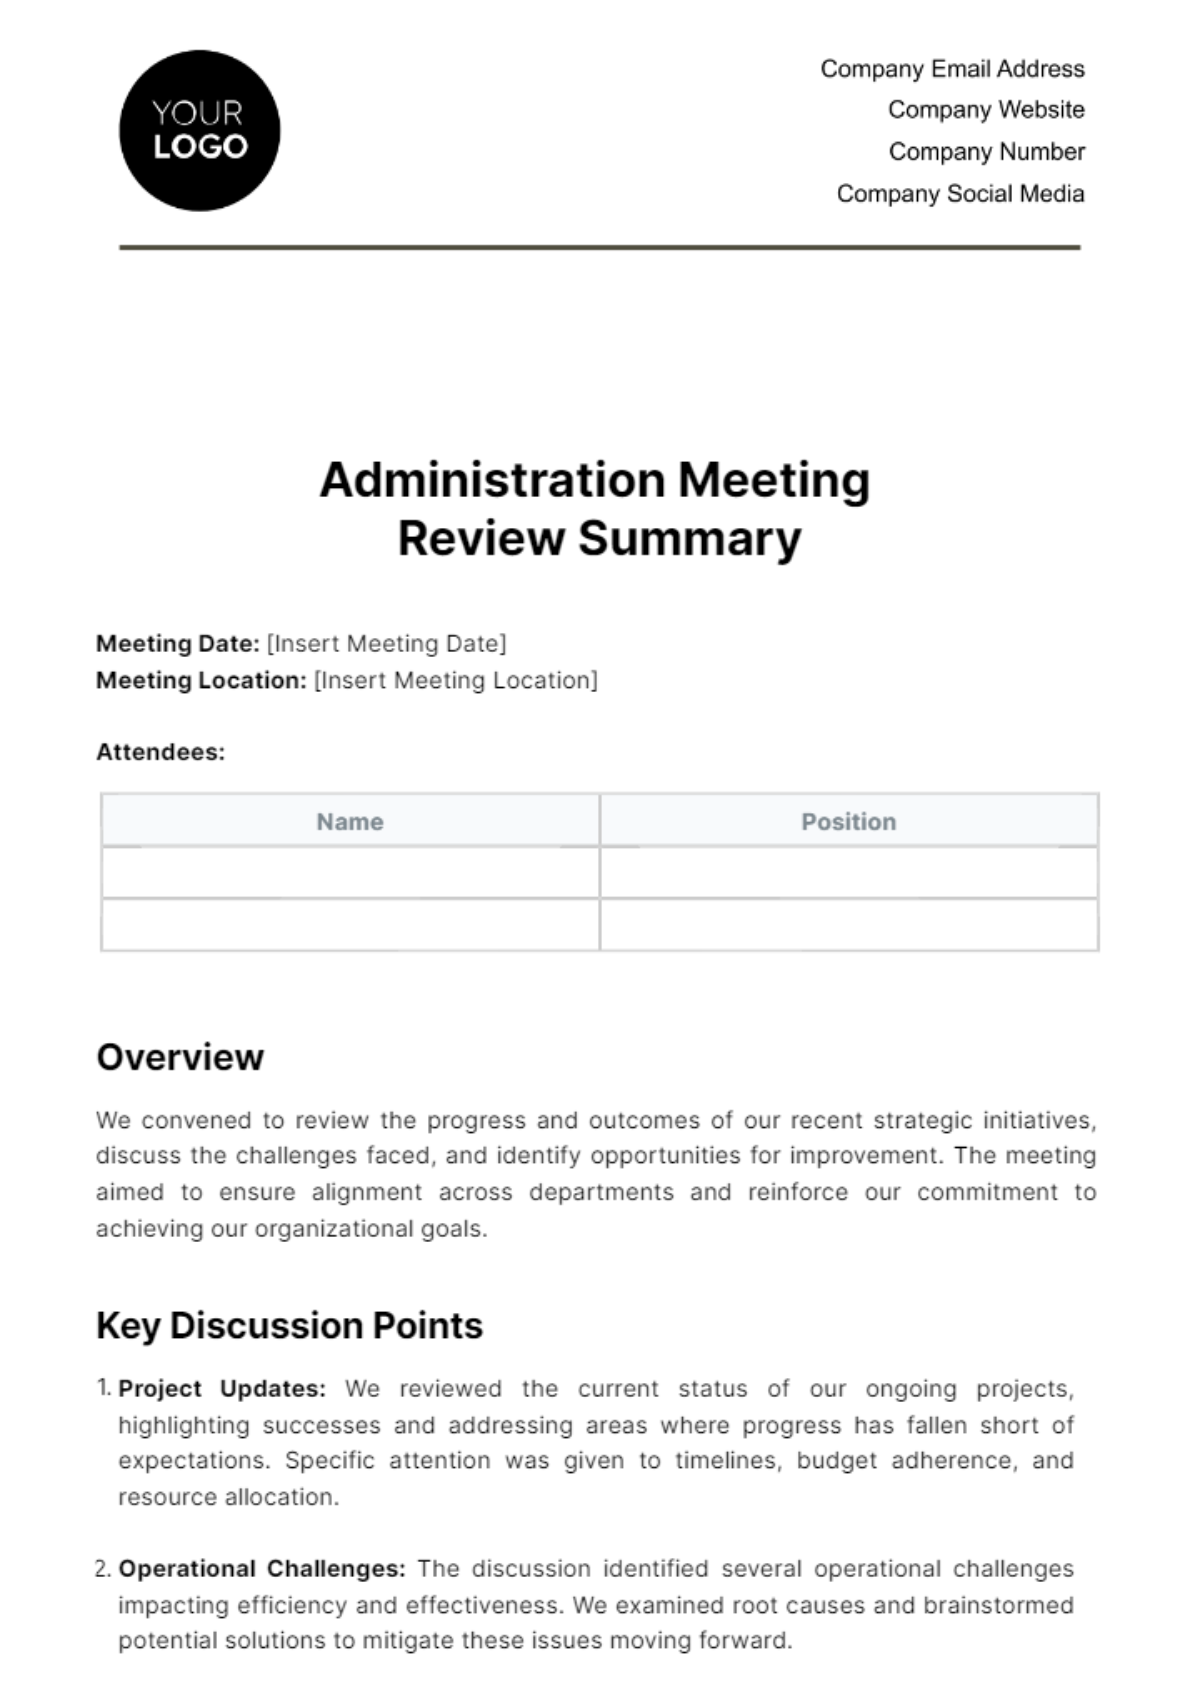 Free Administration Meeting Review Summary Template